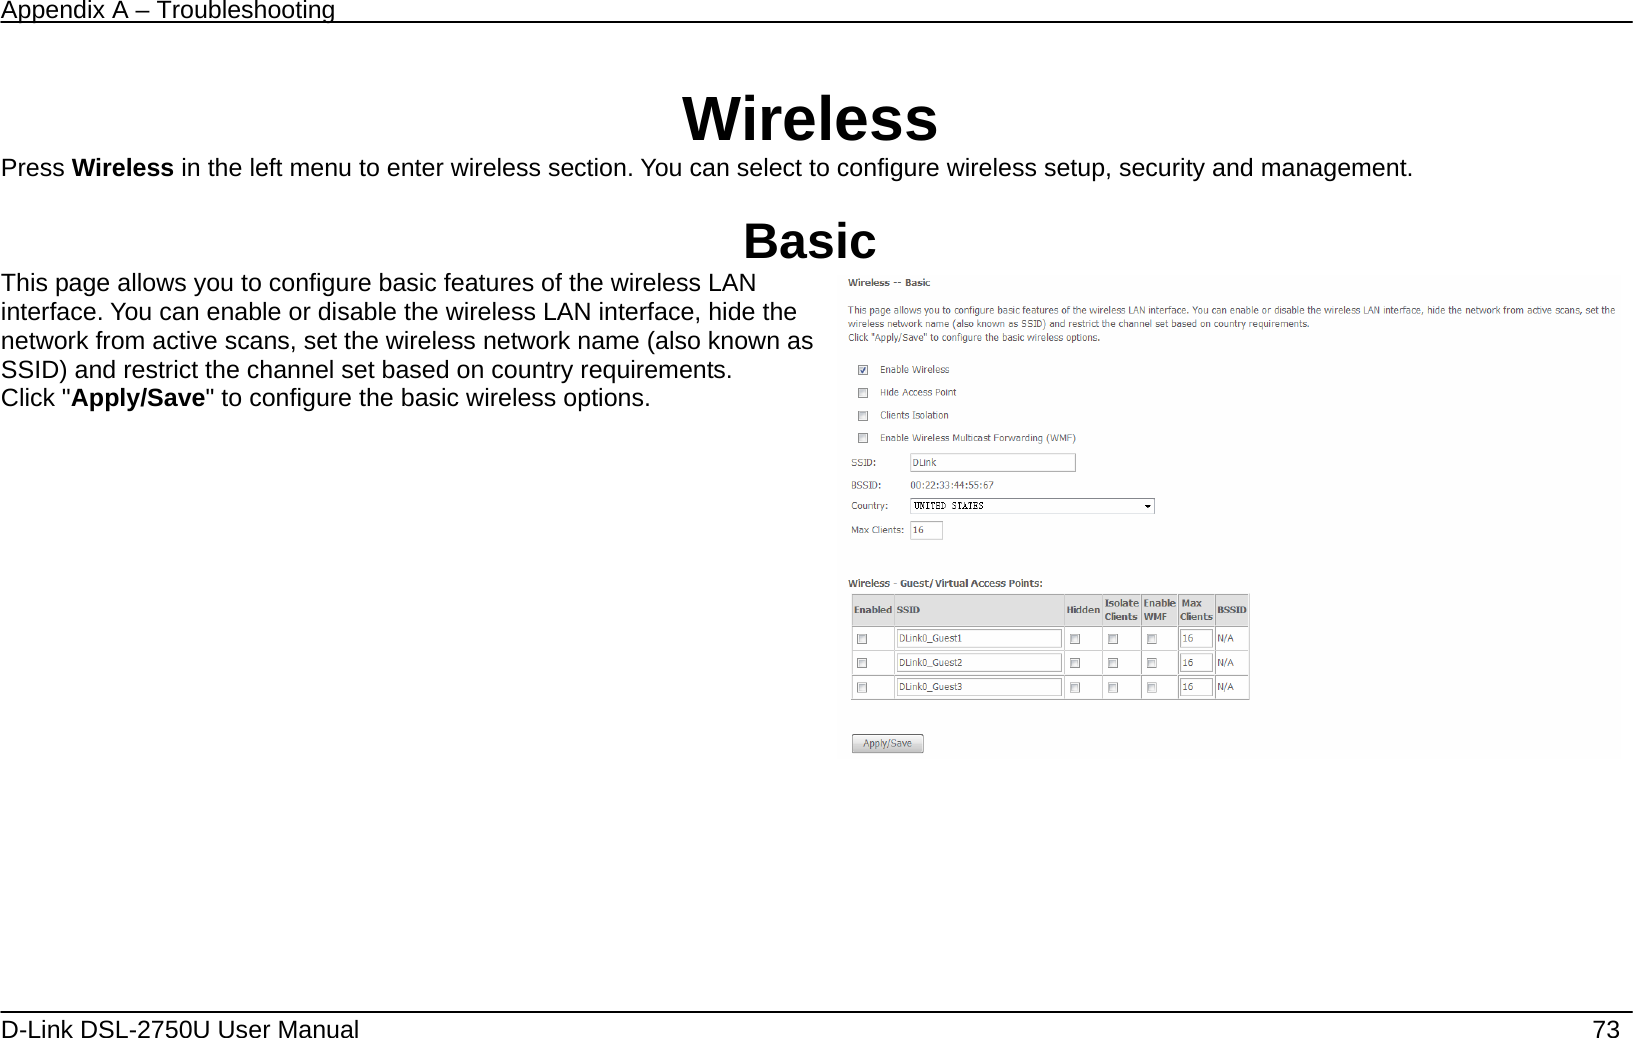 Appendix A – Troubleshooting   D-Link DSL-2750U User Manual    73  Wireless Press Wireless in the left menu to enter wireless section. You can select to configure wireless setup, security and management.  Basic This page allows you to configure basic features of the wireless LAN interface. You can enable or disable the wireless LAN interface, hide the network from active scans, set the wireless network name (also known as SSID) and restrict the channel set based on country requirements. Click &quot;Apply/Save&quot; to configure the basic wireless options.         